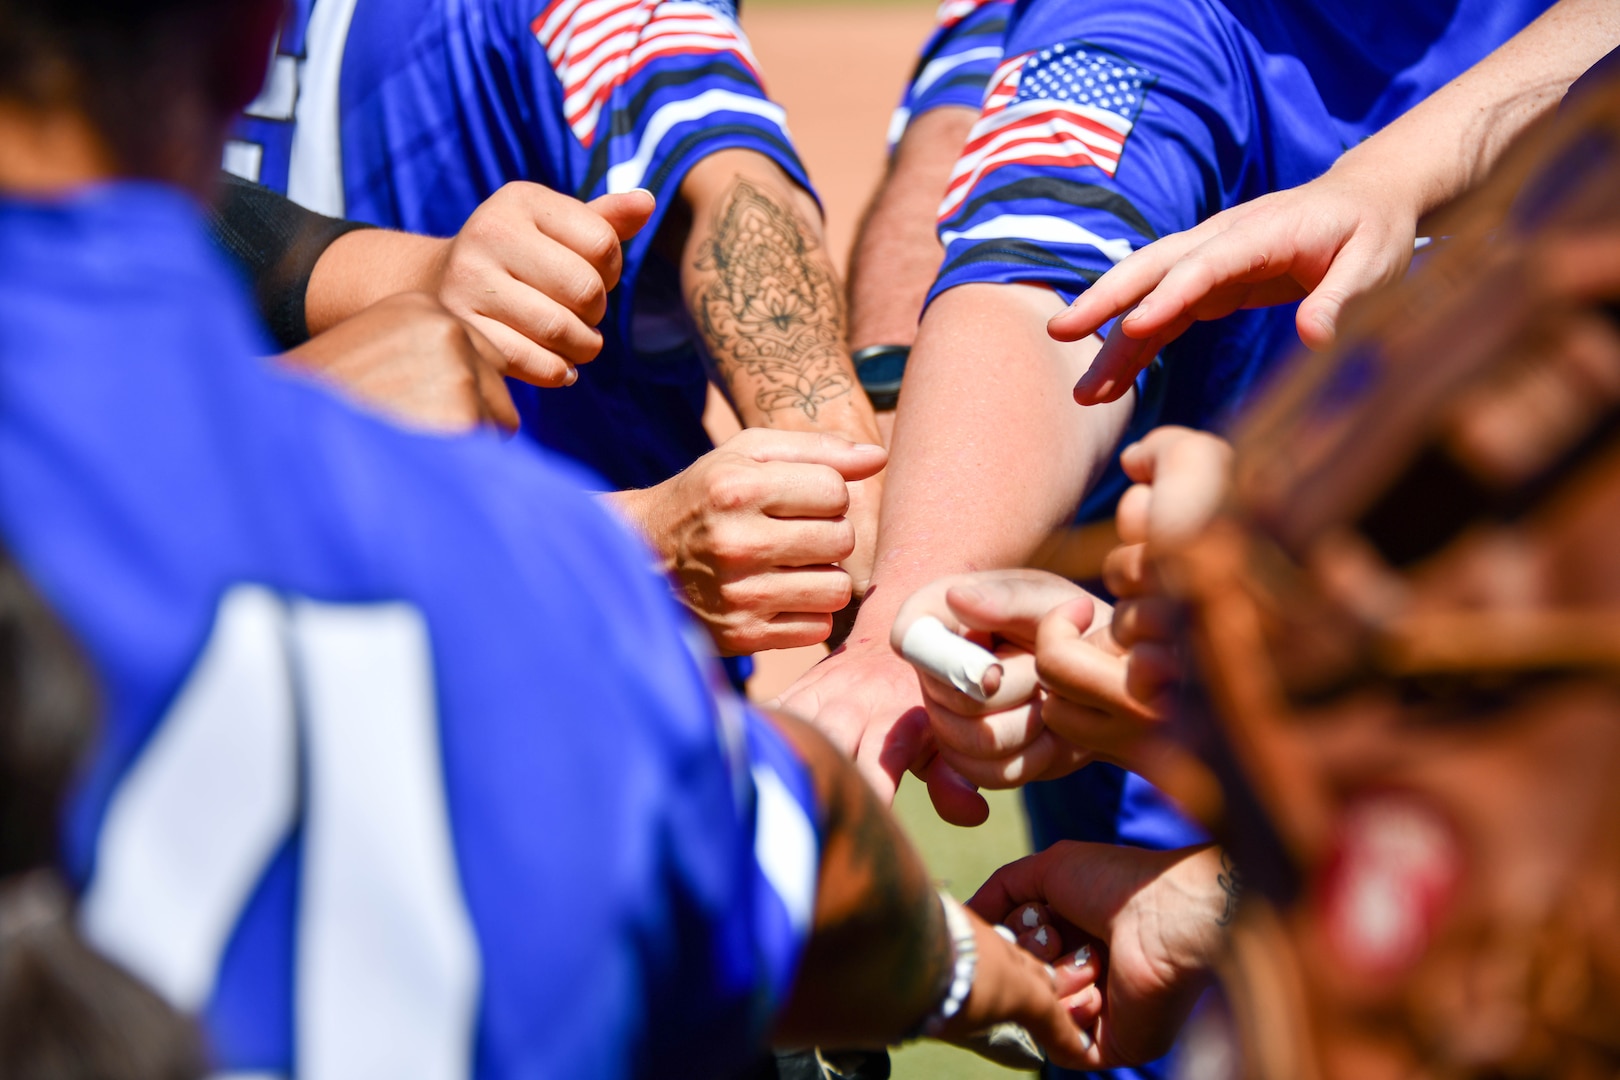 Members of the United States Air Force Women’s Softball Team form in a huddle before an Armed Forces Sports softball game at the USA Softball Hall of Fame Complex in Oklahoma City, Aug. 8, 2023. The tournament comprised all branches of the military which was held from Aug. 4-10, 2023. (U.S. Air Force photo by Airman 1st Class Miyah Gray)